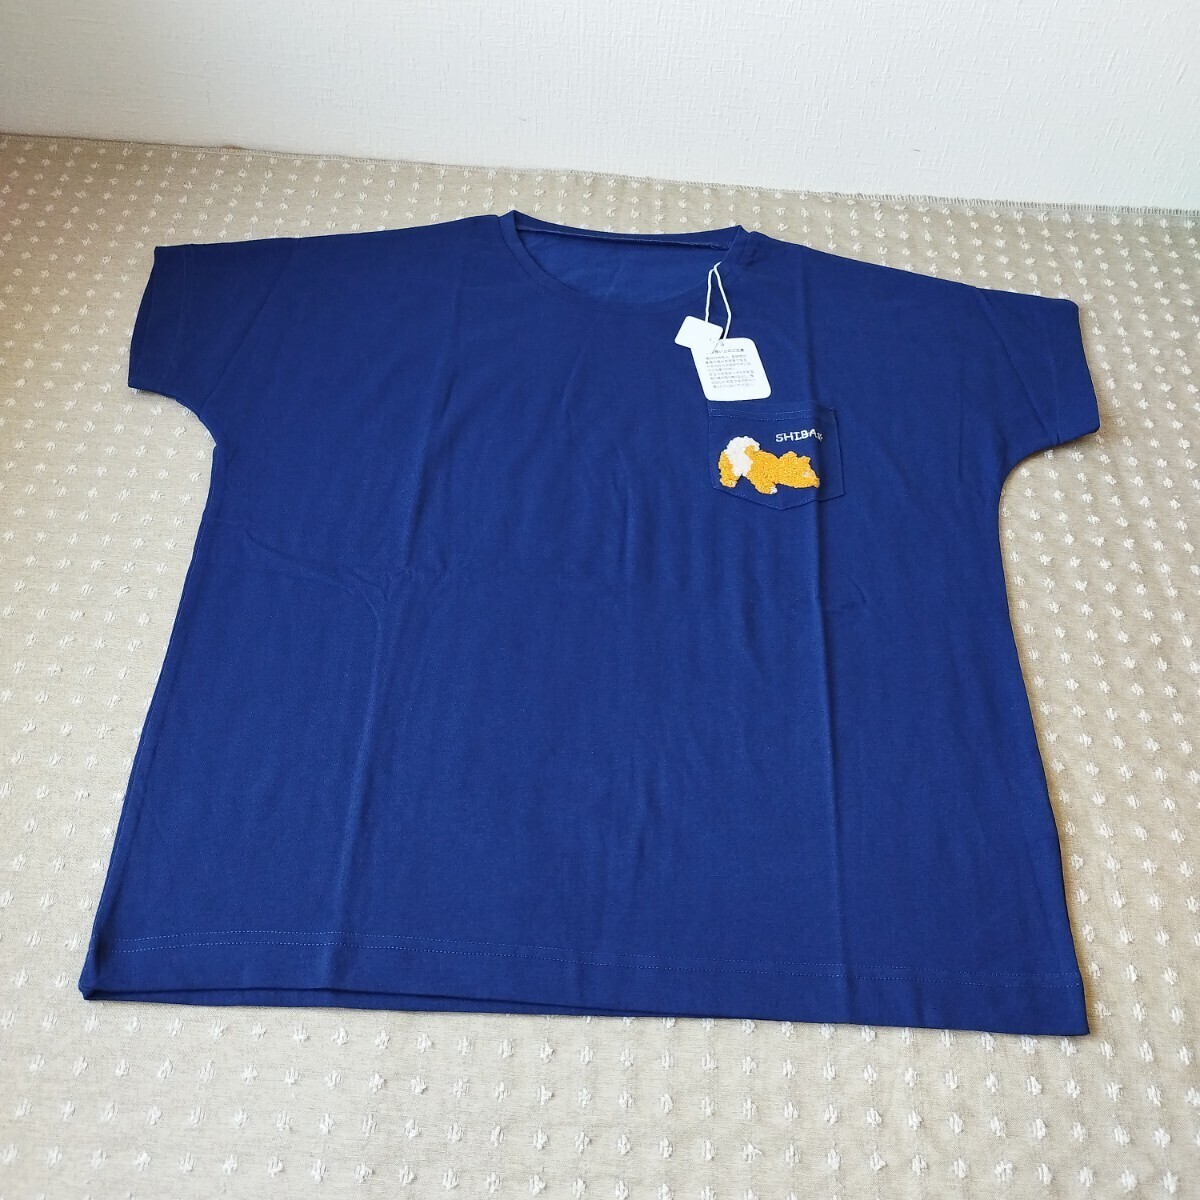  unused tag attaching .... embroidery T-shirt short sleeves L washing machine wash navy . dog . pocket * color pattern size different have * cat pohs free shipping 